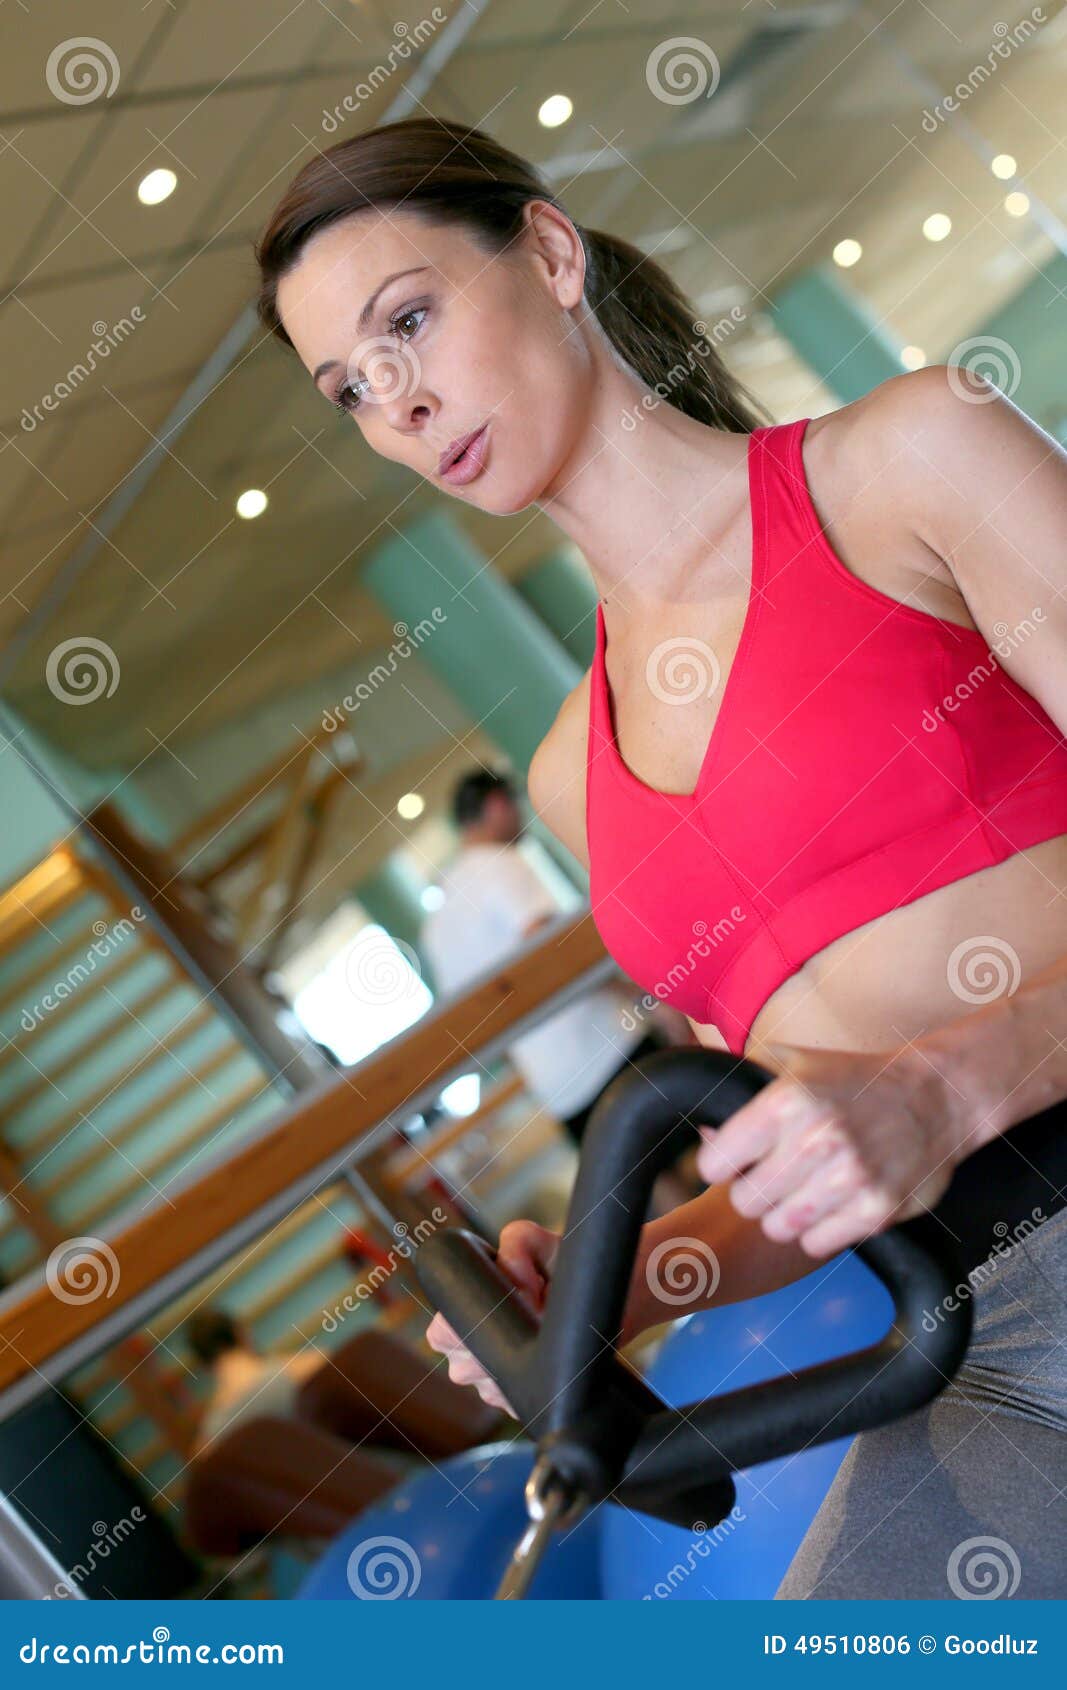 Young Sportive Woman Excercising on a Fitness Machine Stock Photo ...